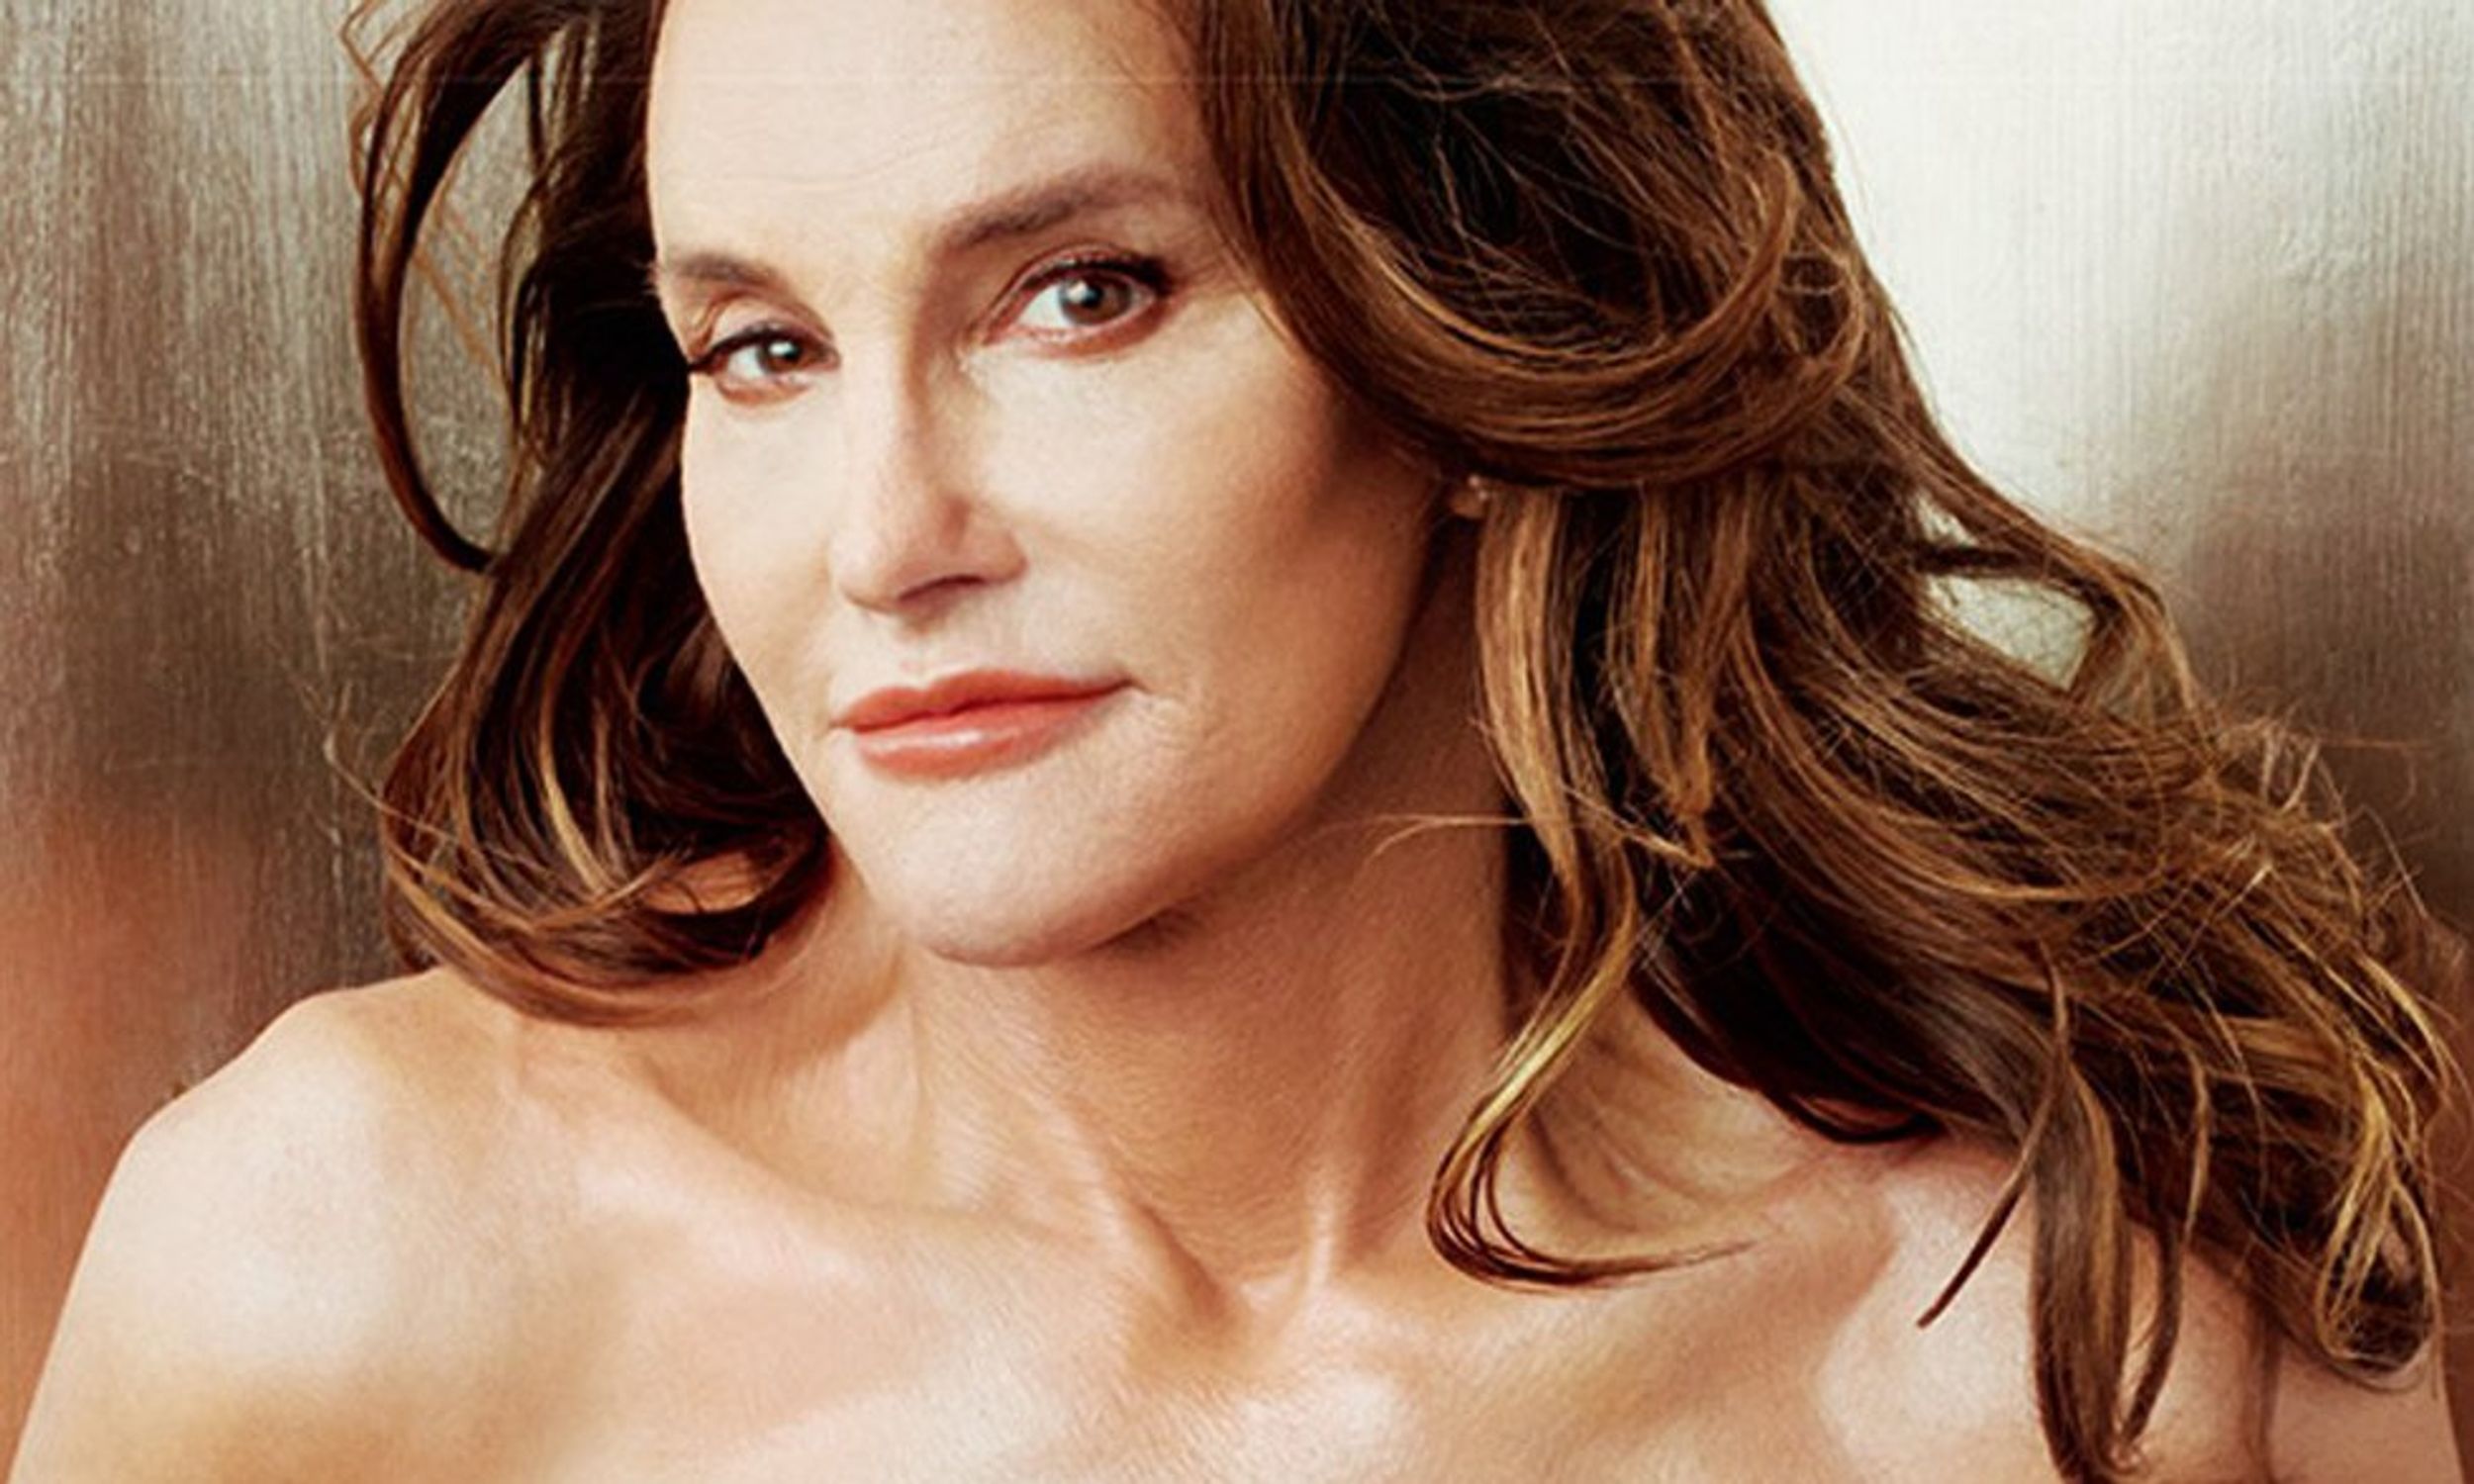 Why Caitlyn Jenner Should Not Have Been Awarded "Woman of the Year"